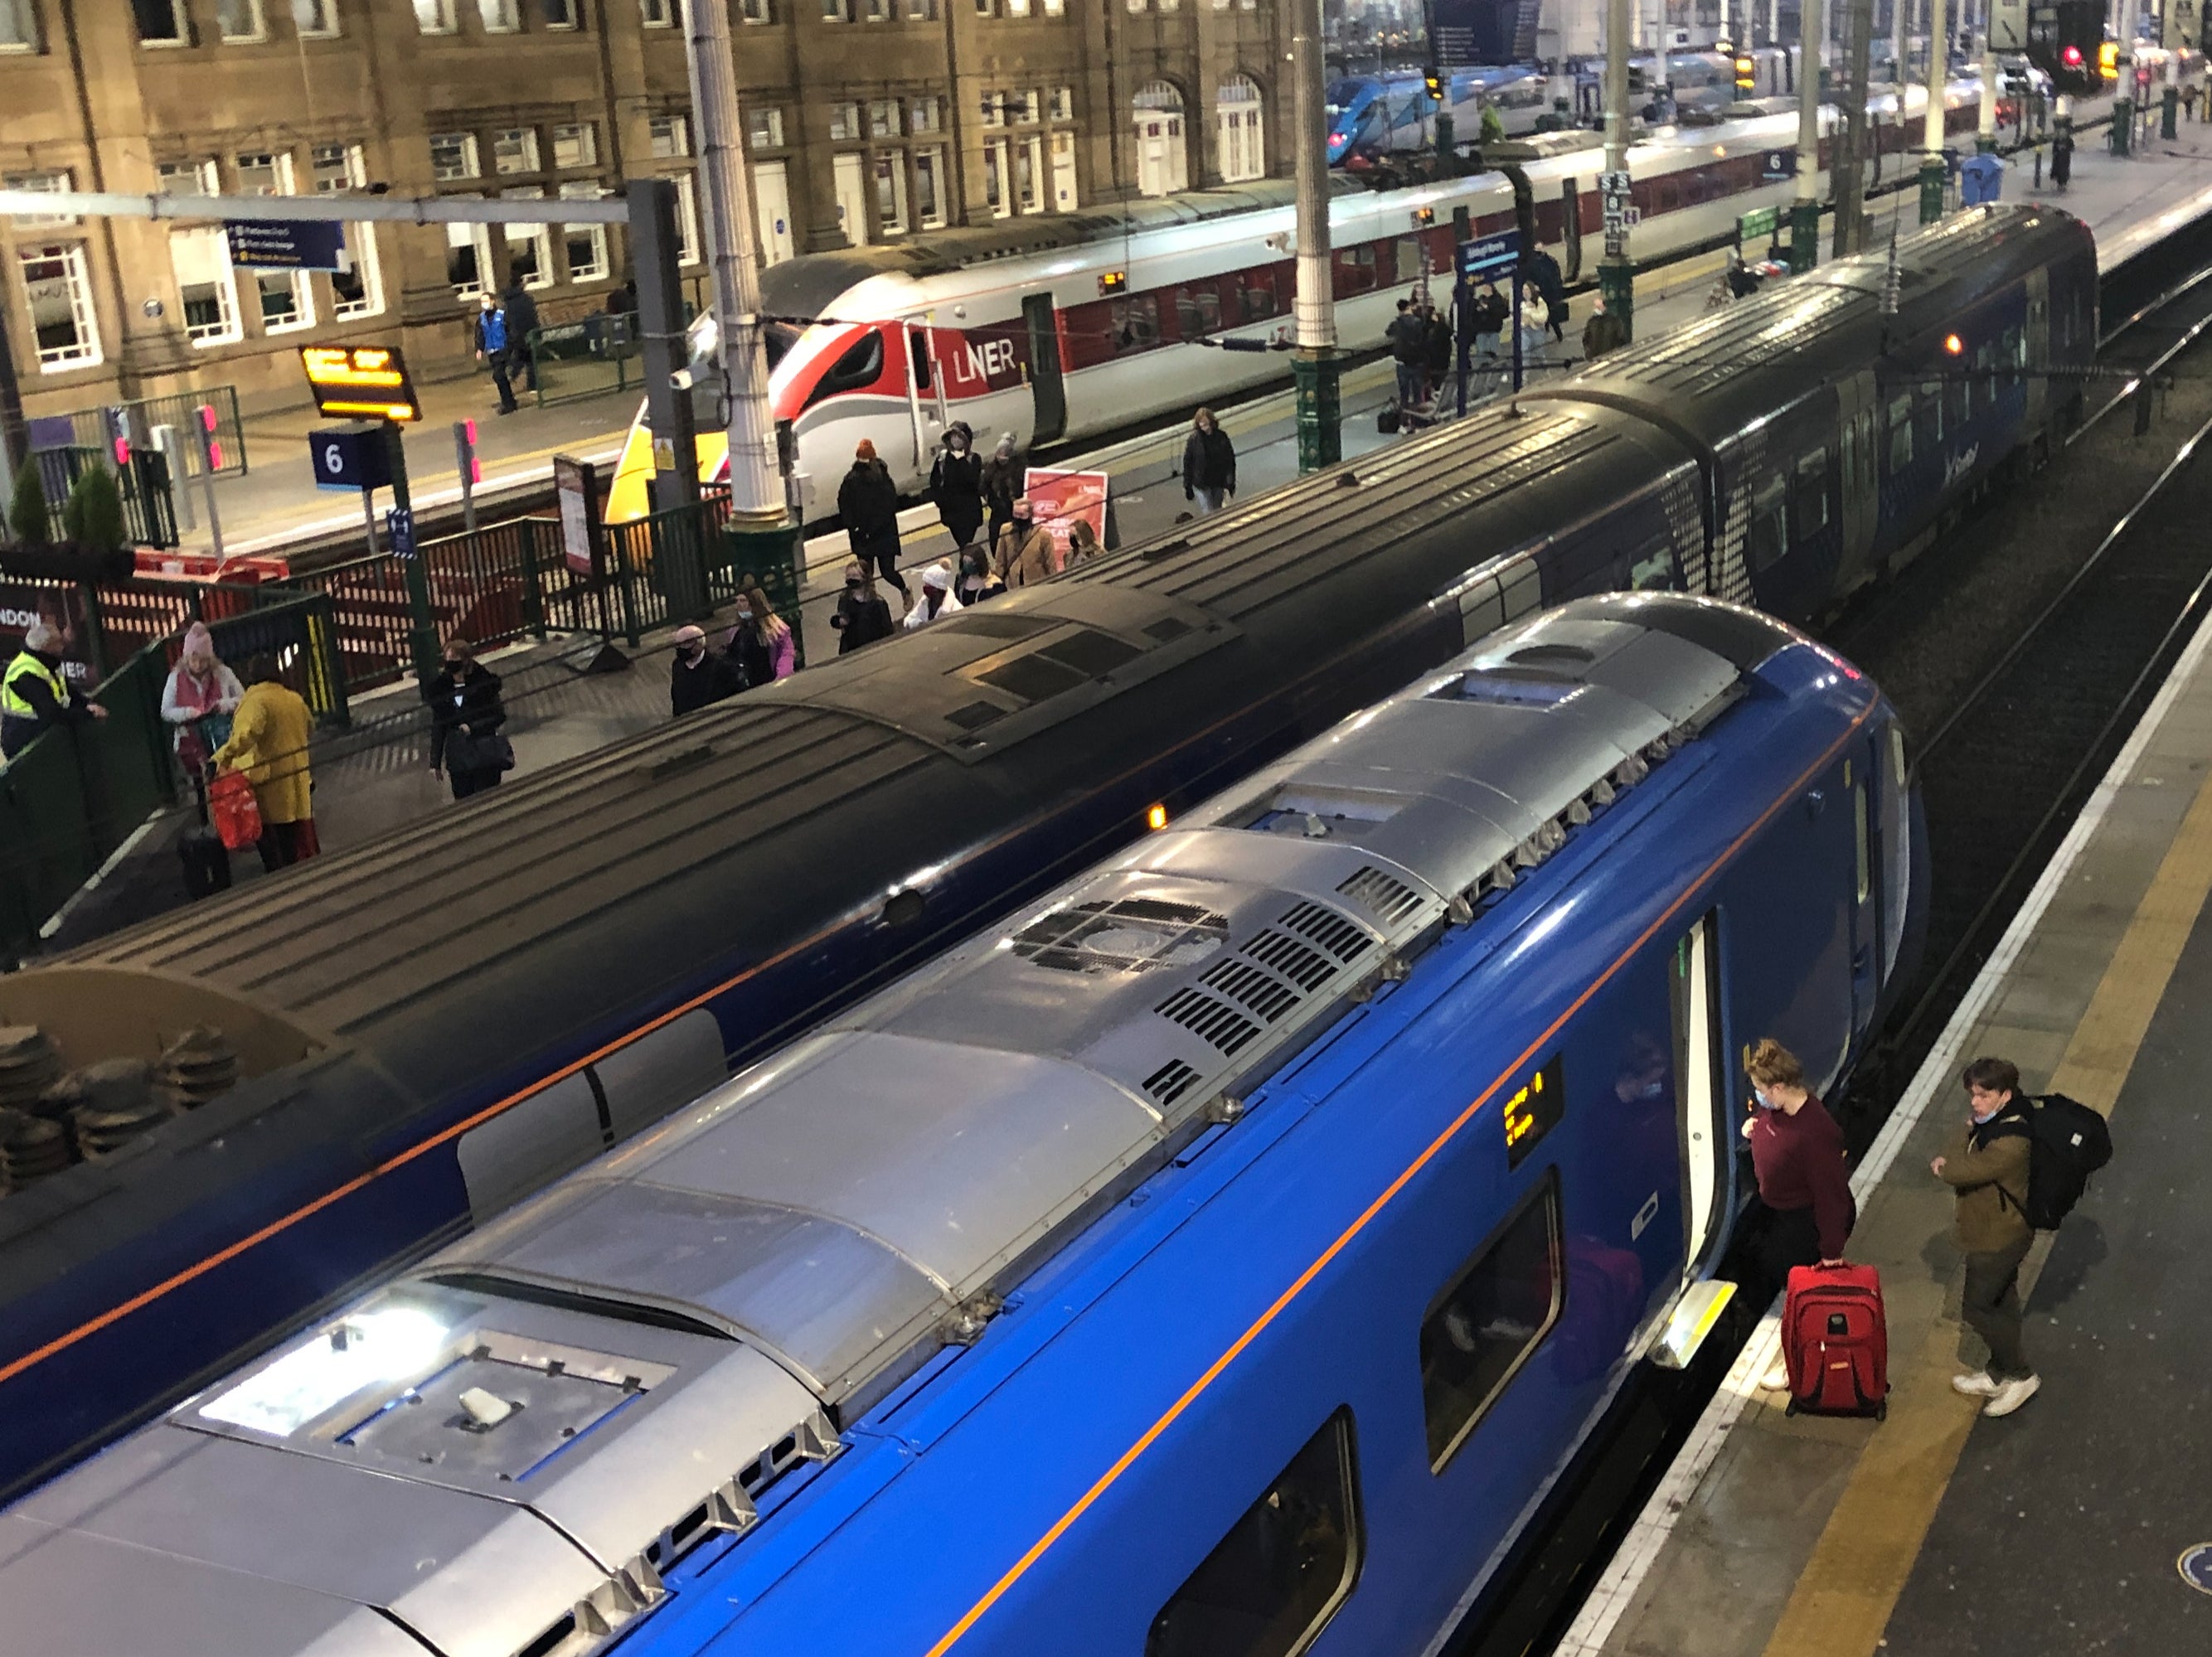 Going south? LNER (top) and Lumo (bottom) trains will not make it to London on the weekend of 18 and 19 February